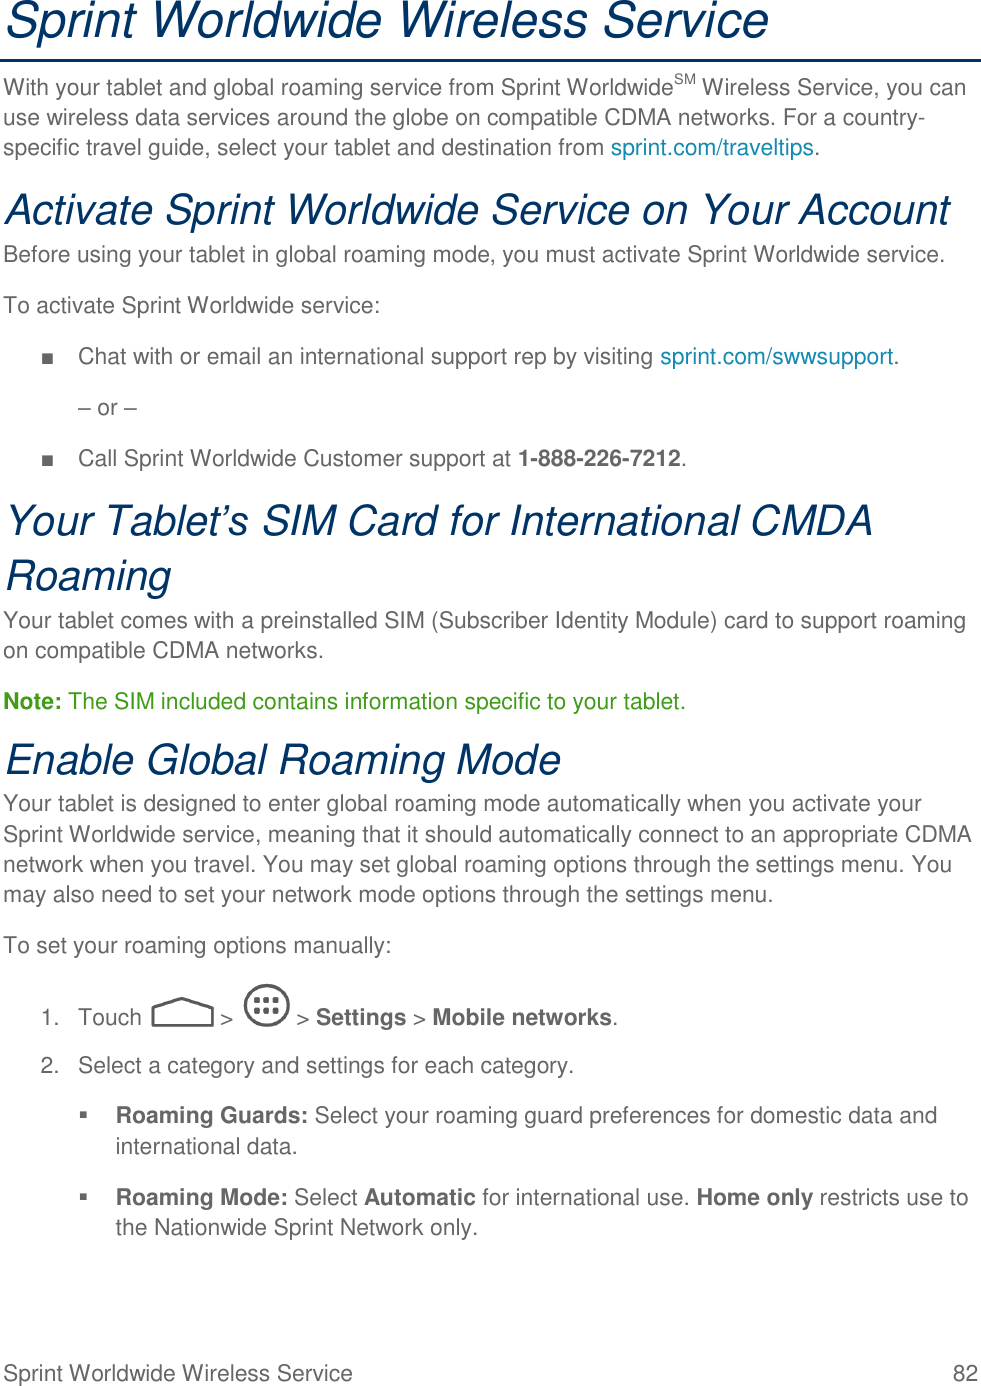  Sprint Worldwide Wireless Service  82 Sprint Worldwide Wireless Service With your tablet and global roaming service from Sprint WorldwideSM Wireless Service, you can use wireless data services around the globe on compatible CDMA networks. For a country-specific travel guide, select your tablet and destination from sprint.com/traveltips.  Activate Sprint Worldwide Service on Your Account  Before using your tablet in global roaming mode, you must activate Sprint Worldwide service.  To activate Sprint Worldwide service: ■  Chat with or email an international support rep by visiting sprint.com/swwsupport. – or – ■  Call Sprint Worldwide Customer support at 1-888-226-7212.  Your Tablet’s SIM Card for International CMDA Roaming Your tablet comes with a preinstalled SIM (Subscriber Identity Module) card to support roaming on compatible CDMA networks. Note: The SIM included contains information specific to your tablet. Enable Global Roaming Mode Your tablet is designed to enter global roaming mode automatically when you activate your Sprint Worldwide service, meaning that it should automatically connect to an appropriate CDMA  network when you travel. You may set global roaming options through the settings menu. You may also need to set your network mode options through the settings menu. To set your roaming options manually: 1.  Touch   &gt;   &gt; Settings &gt; Mobile networks. 2.  Select a category and settings for each category.  Roaming Guards: Select your roaming guard preferences for domestic data and international data.  Roaming Mode: Select Automatic for international use. Home only restricts use to the Nationwide Sprint Network only. 